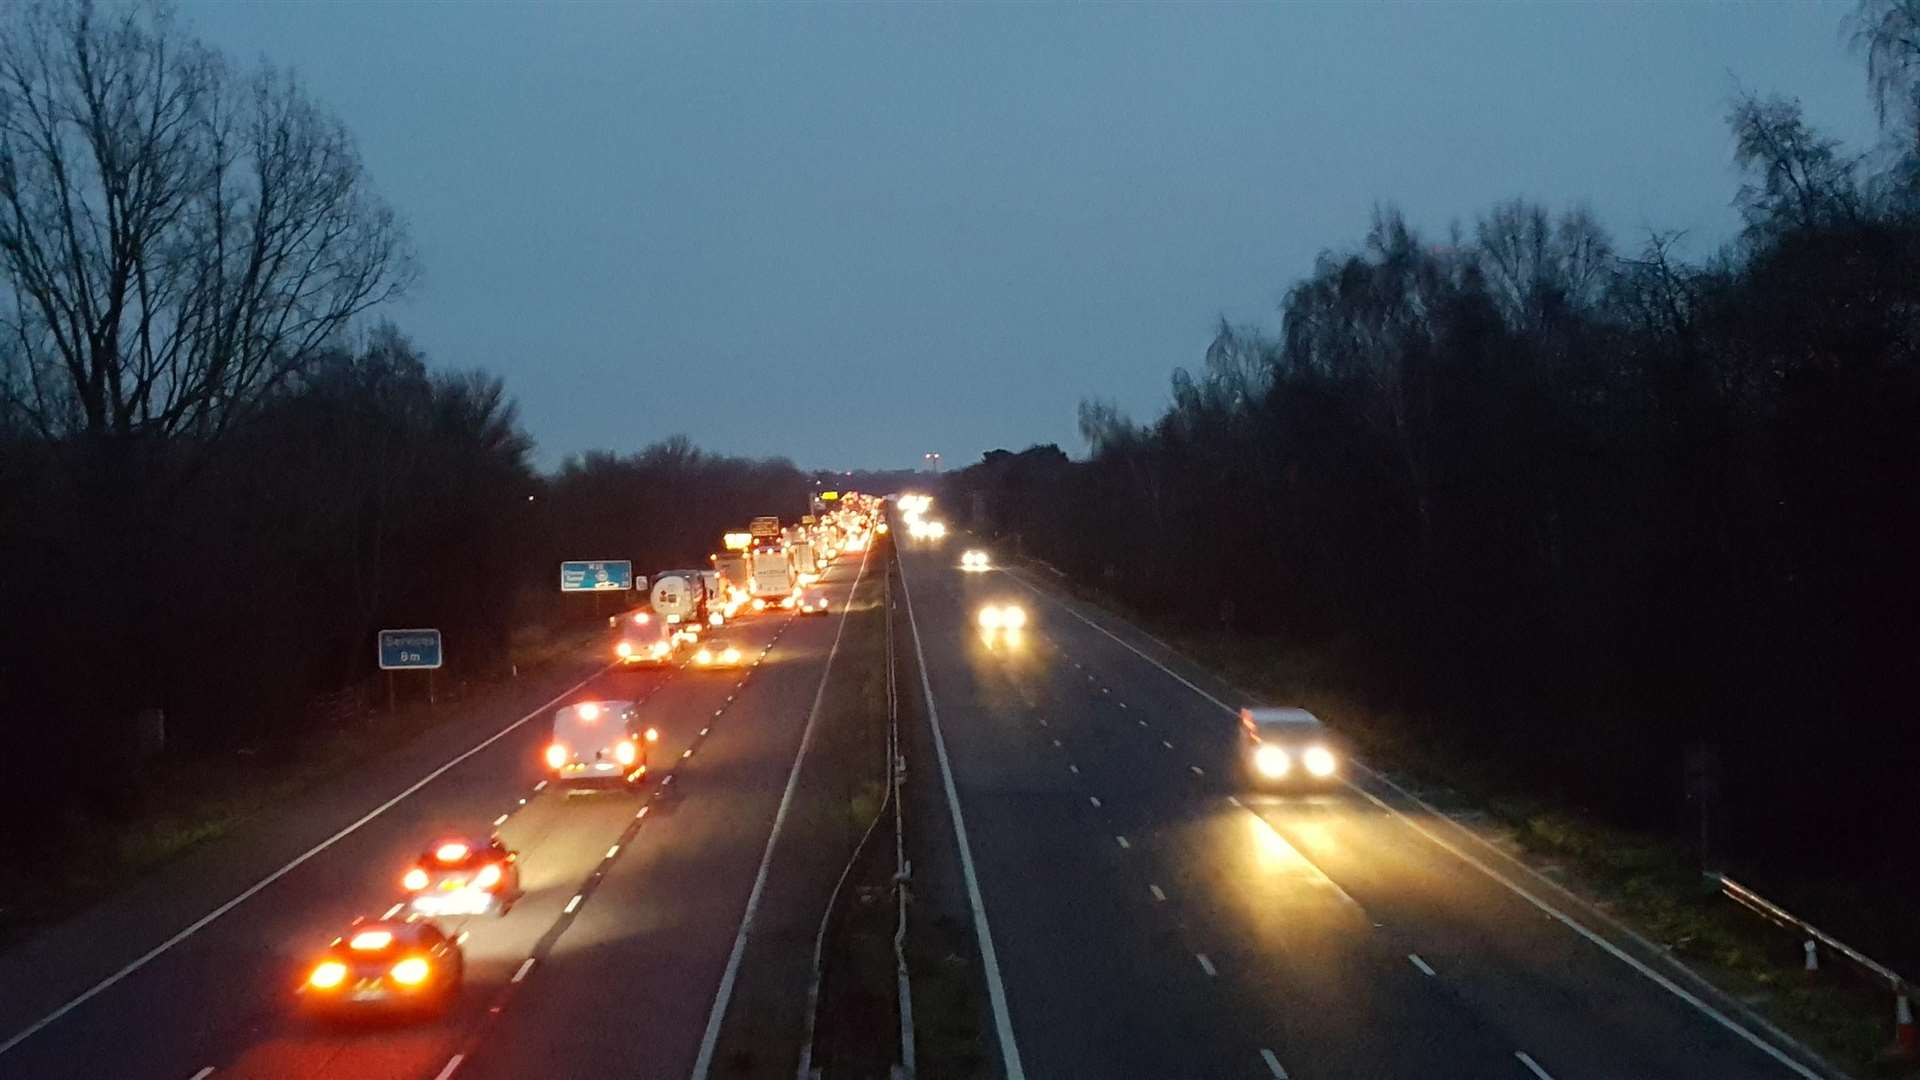 Traffic near the scene of the accident on the M20